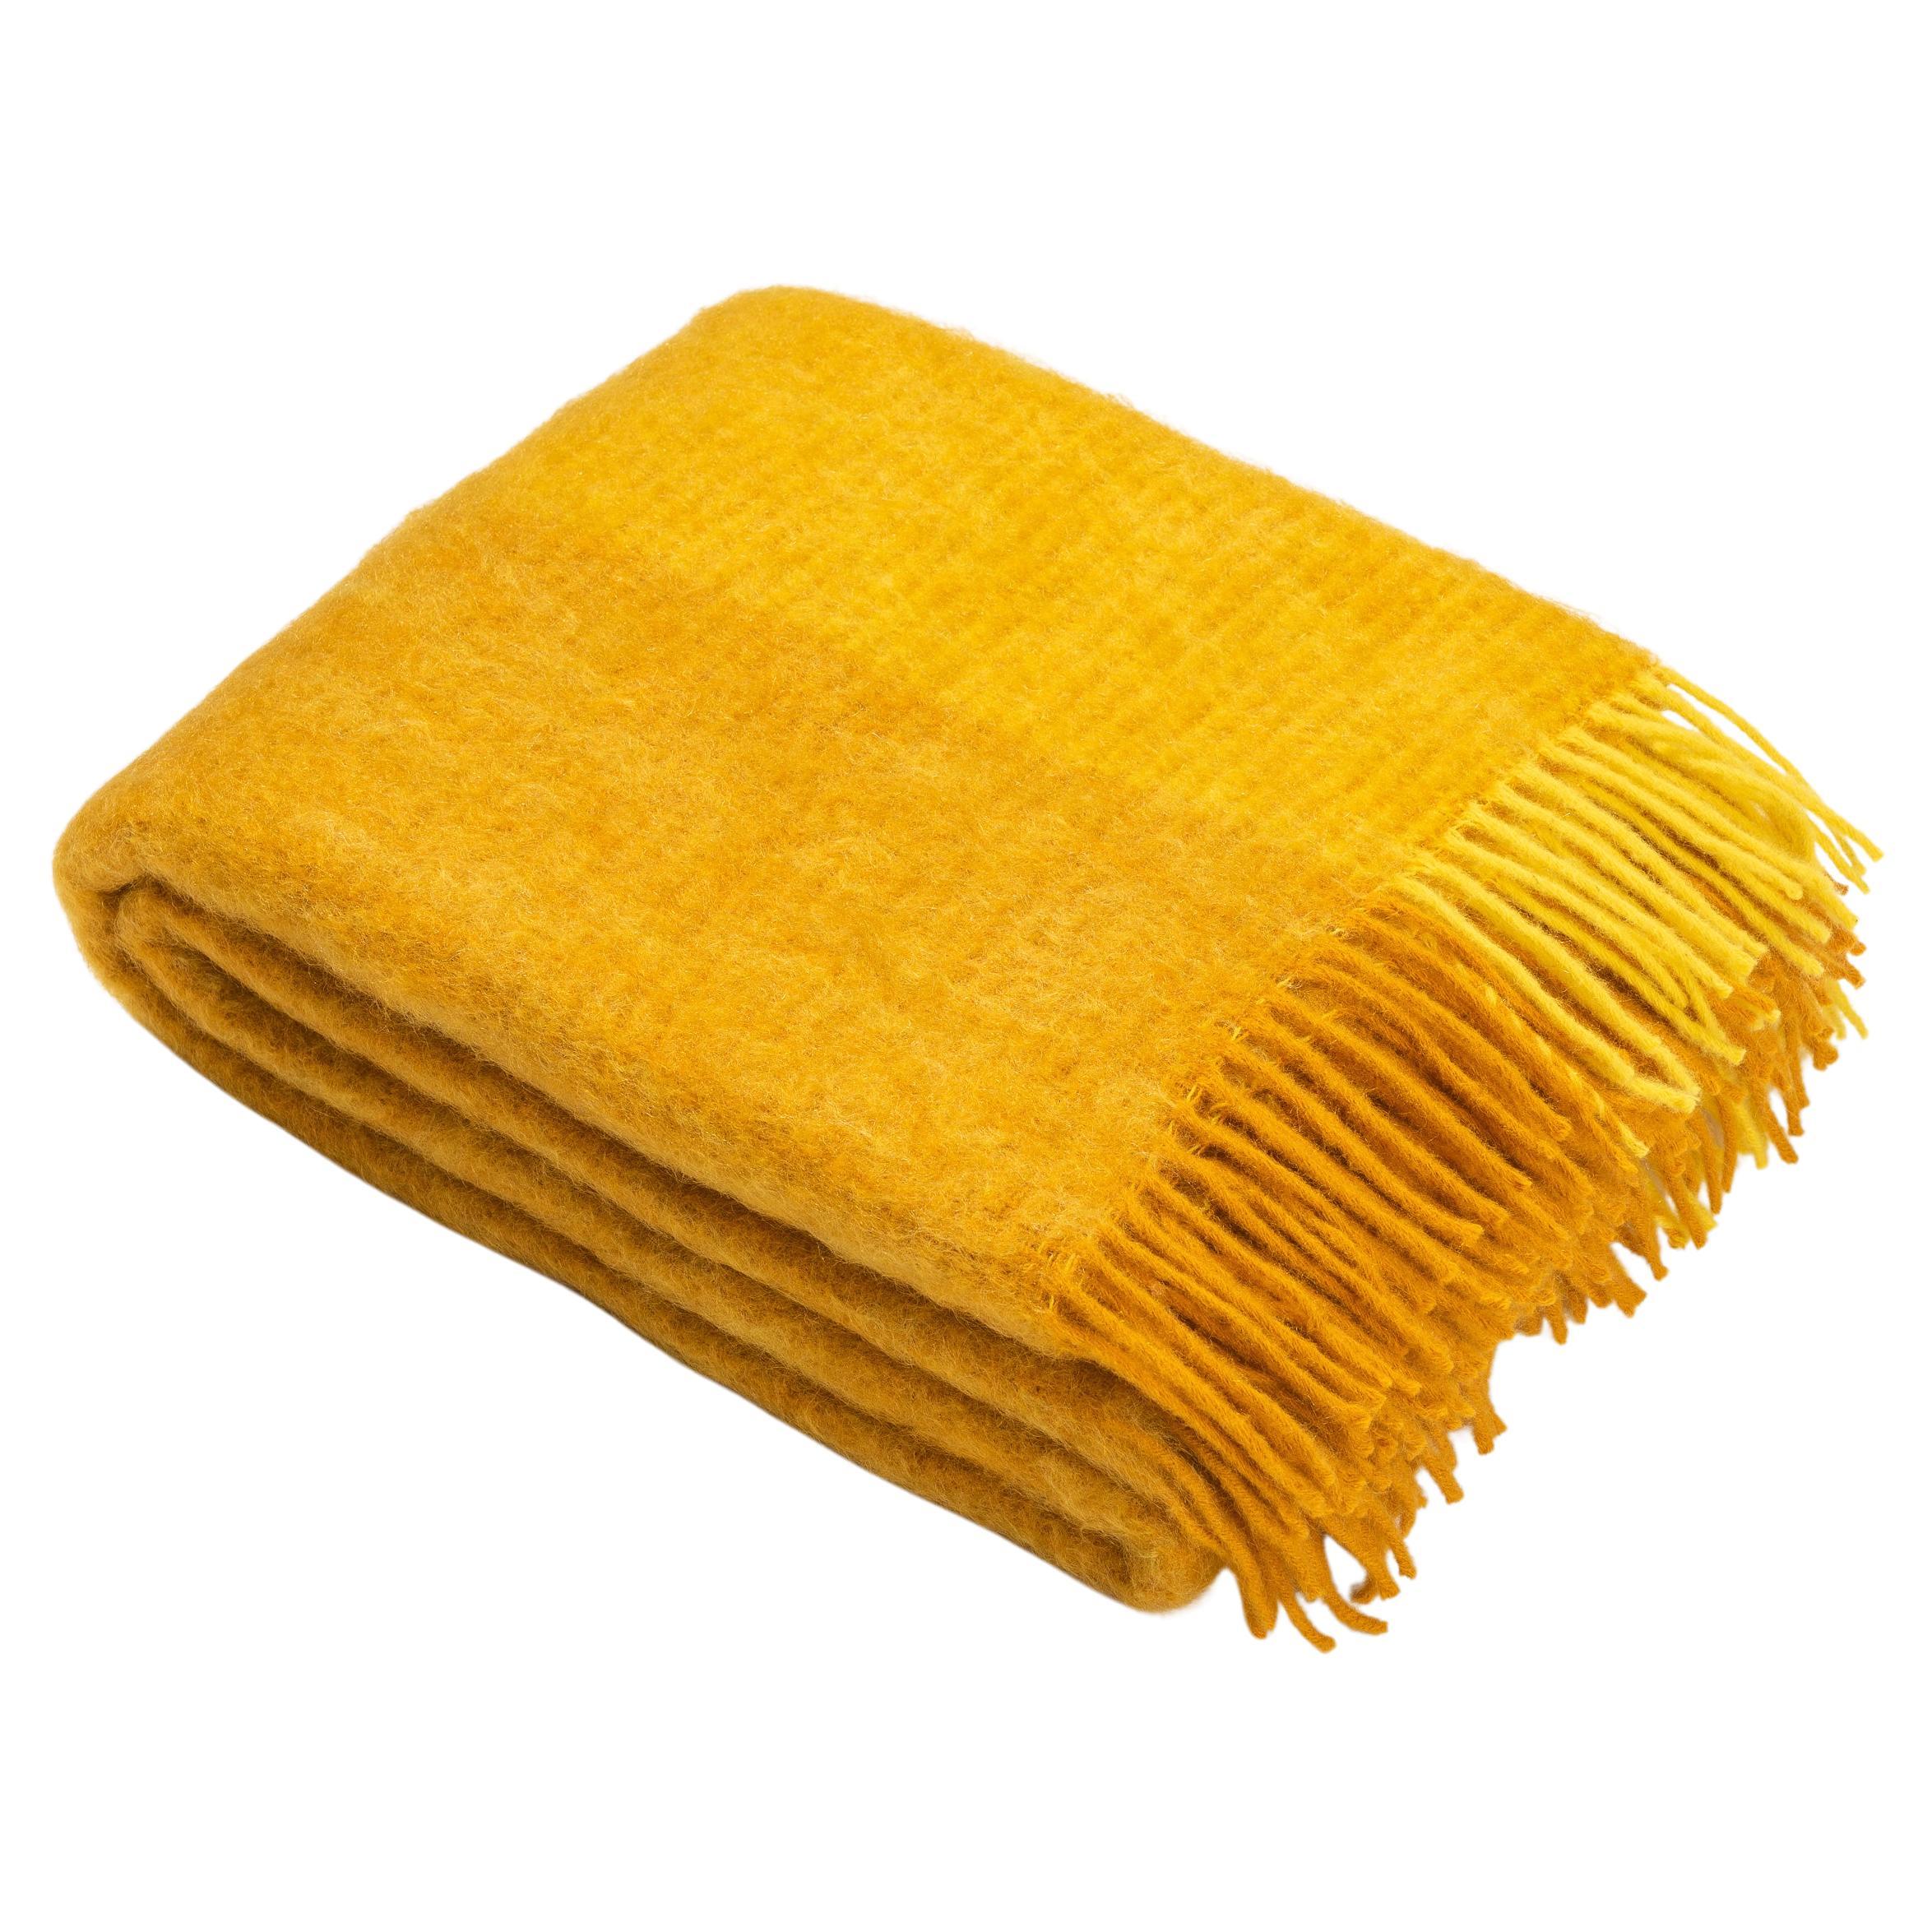 Mohair Blanket Yellow Woven of Mohair and Wool by Catharina Mende